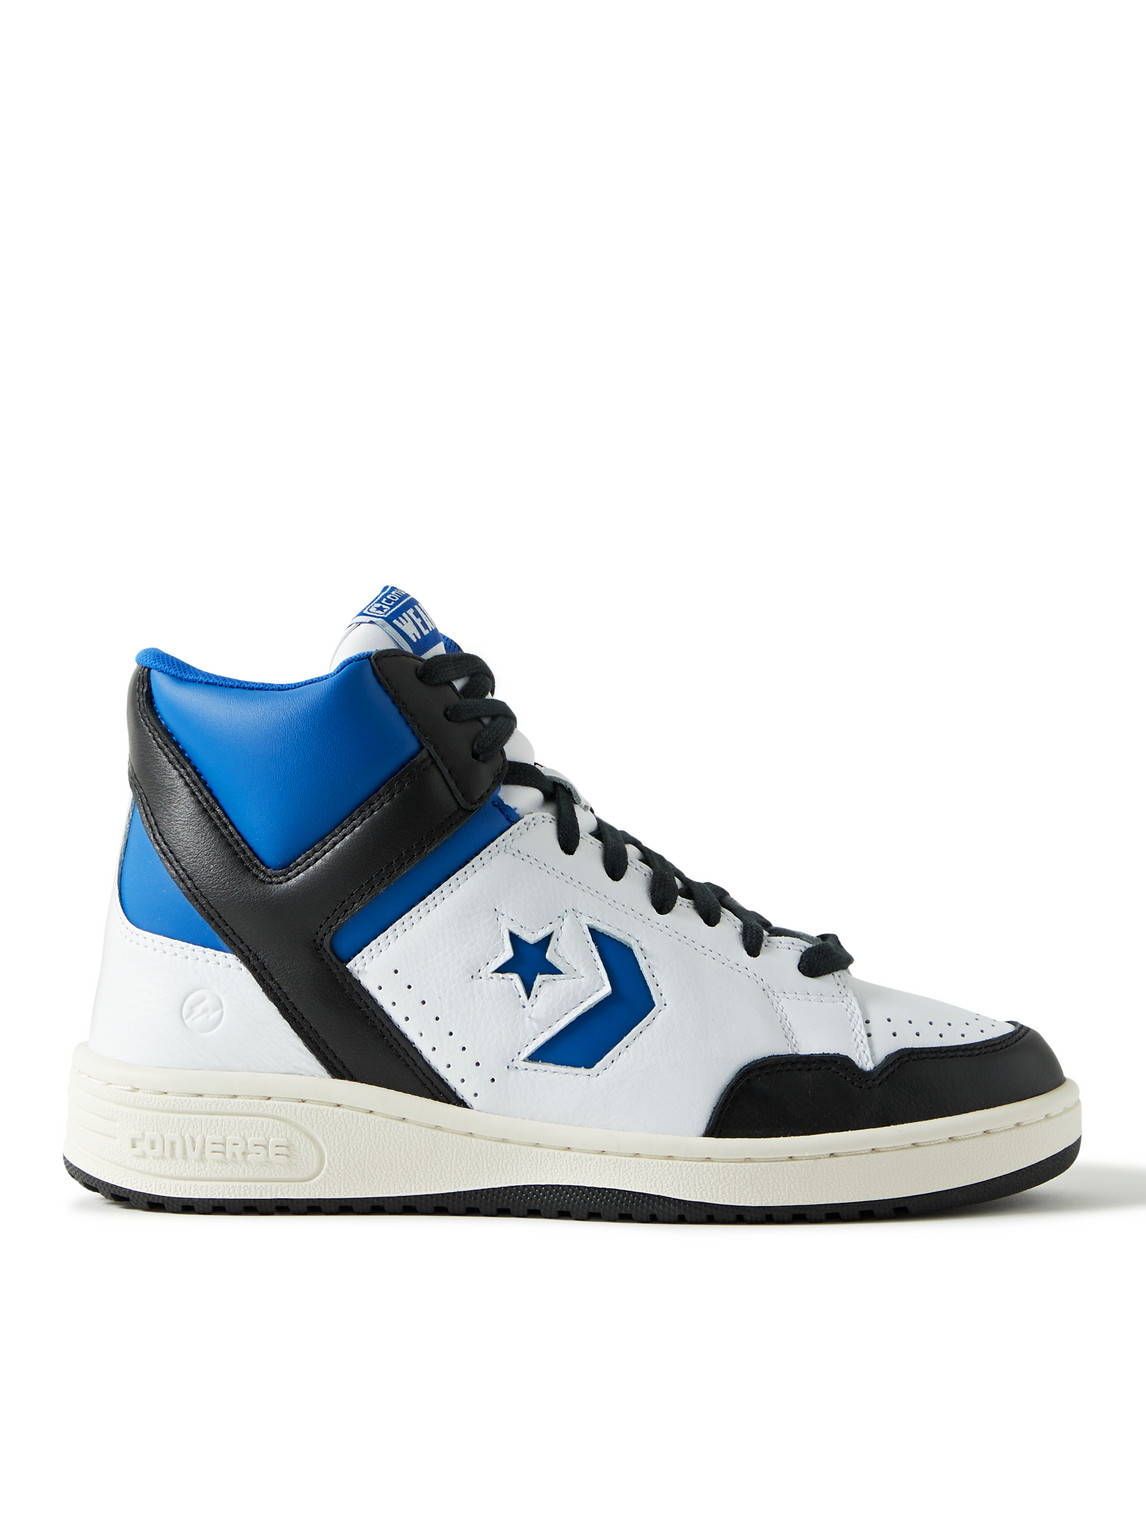 CONVERSE FRAGMENT WEAPON COLOUR-BLOCK LEATHER HIGH-TOP SNEAKERS